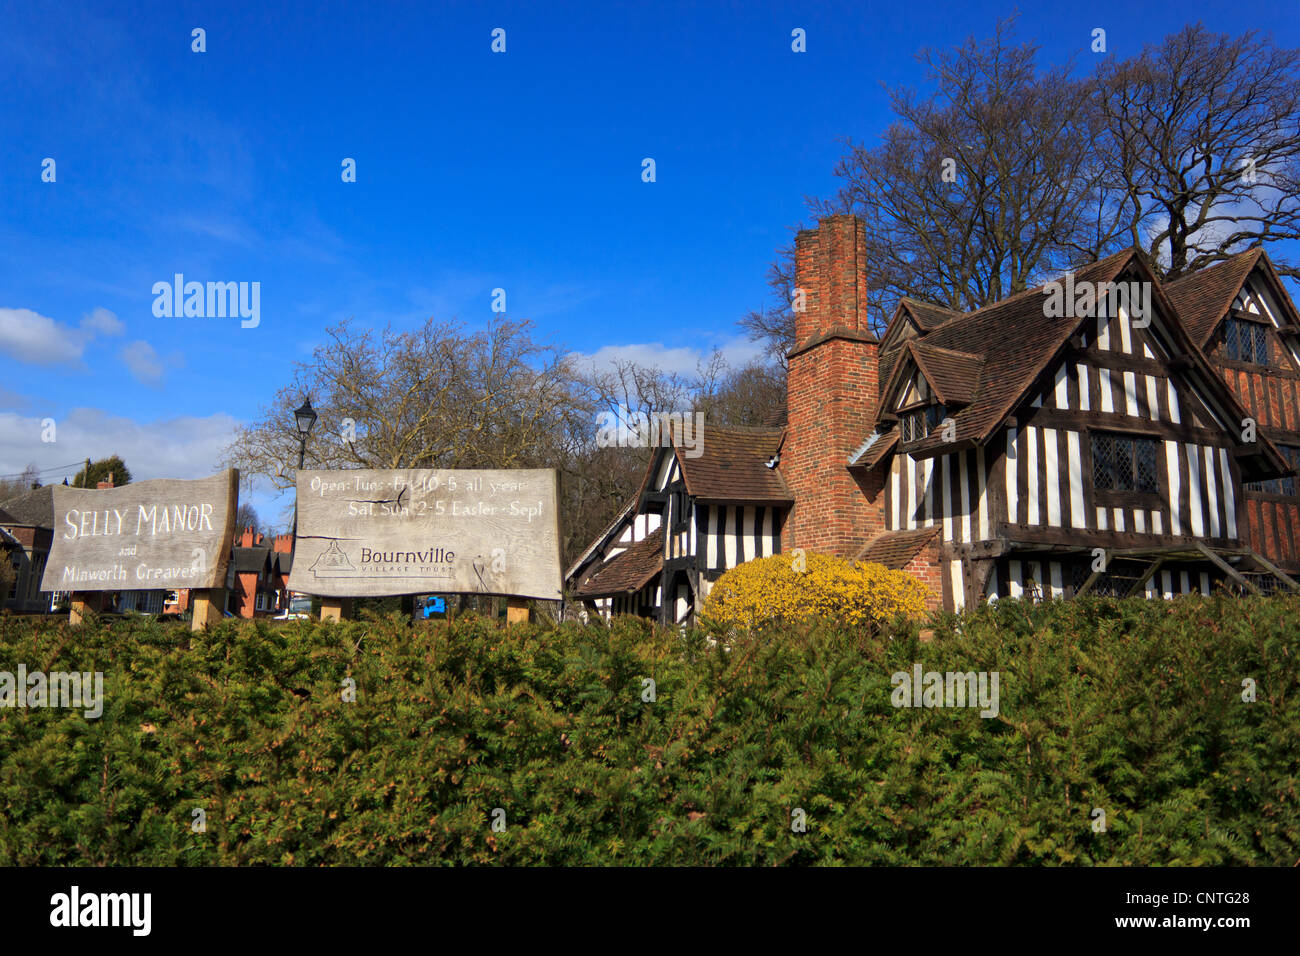 One of Birmingham's oldest buildings, SELLY MANOR dates back to the 1300s. Stock Photo